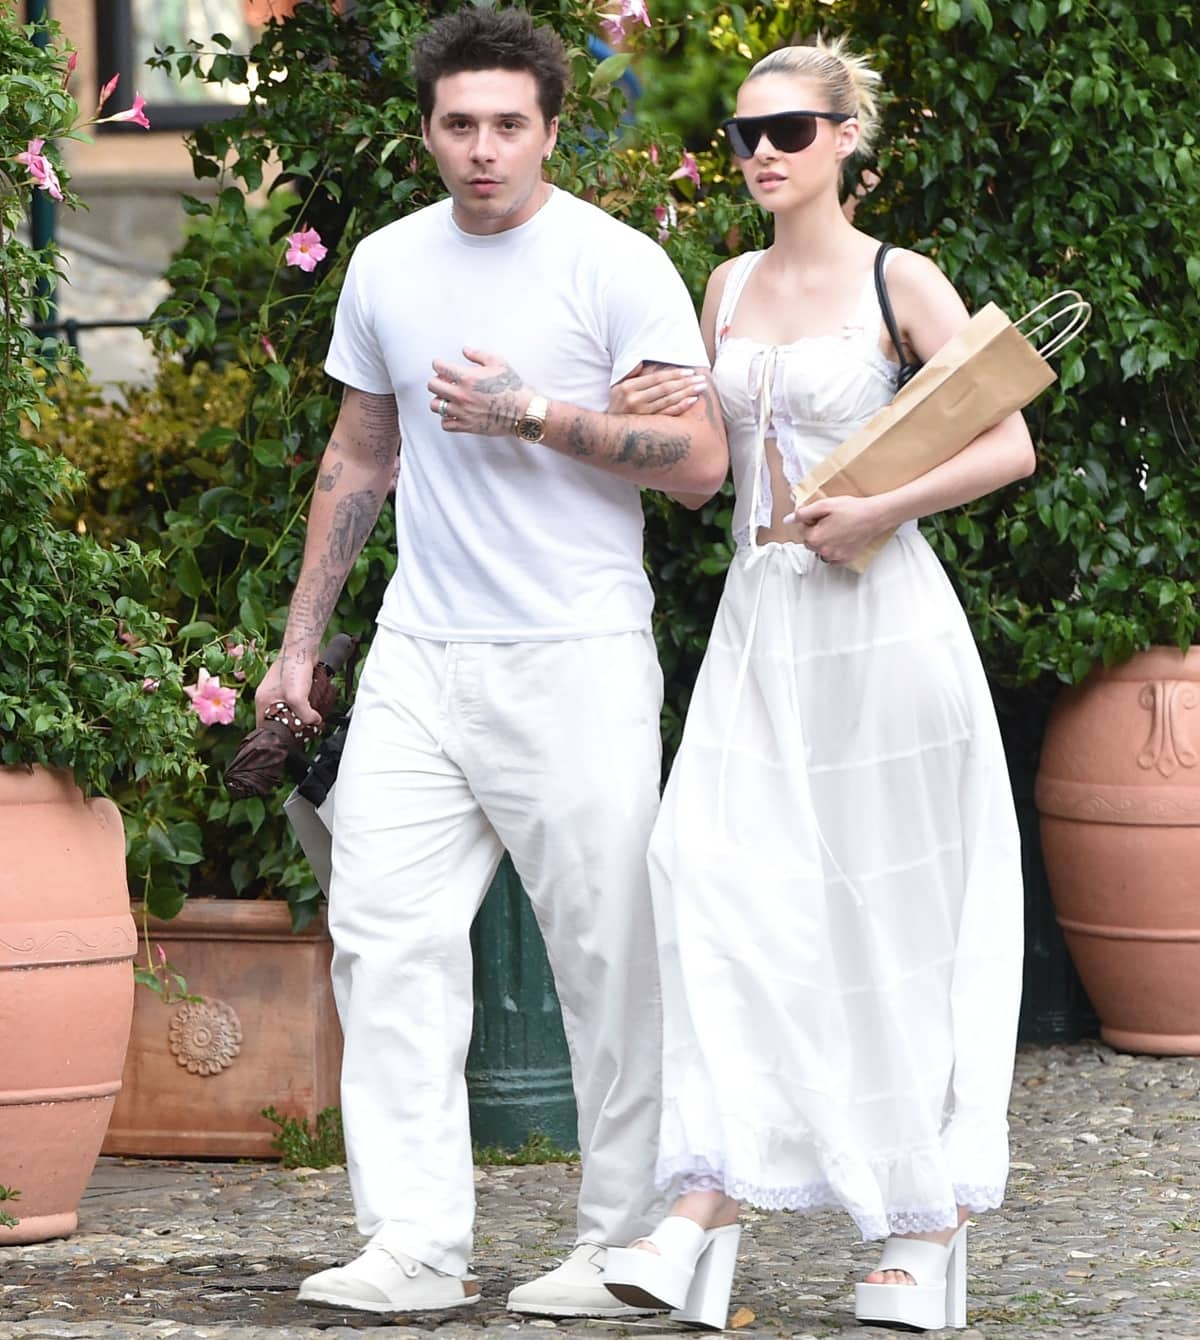 Newlyweds Brooklyn and Nicola Peltz Beckham in matching all-white outfits